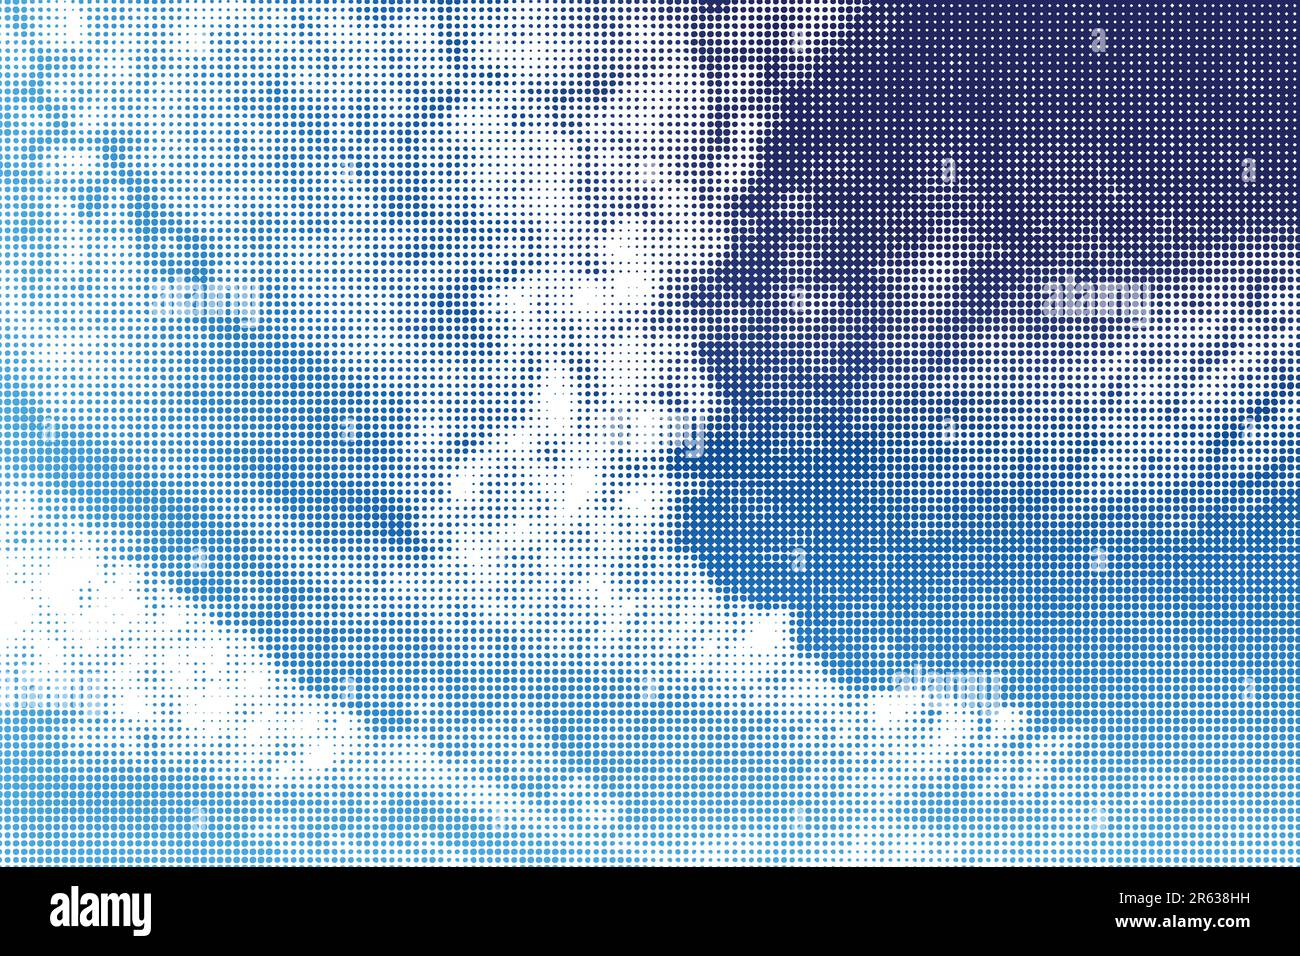 Halftone editable vector illustration of blue sky and clouds Stock Vector